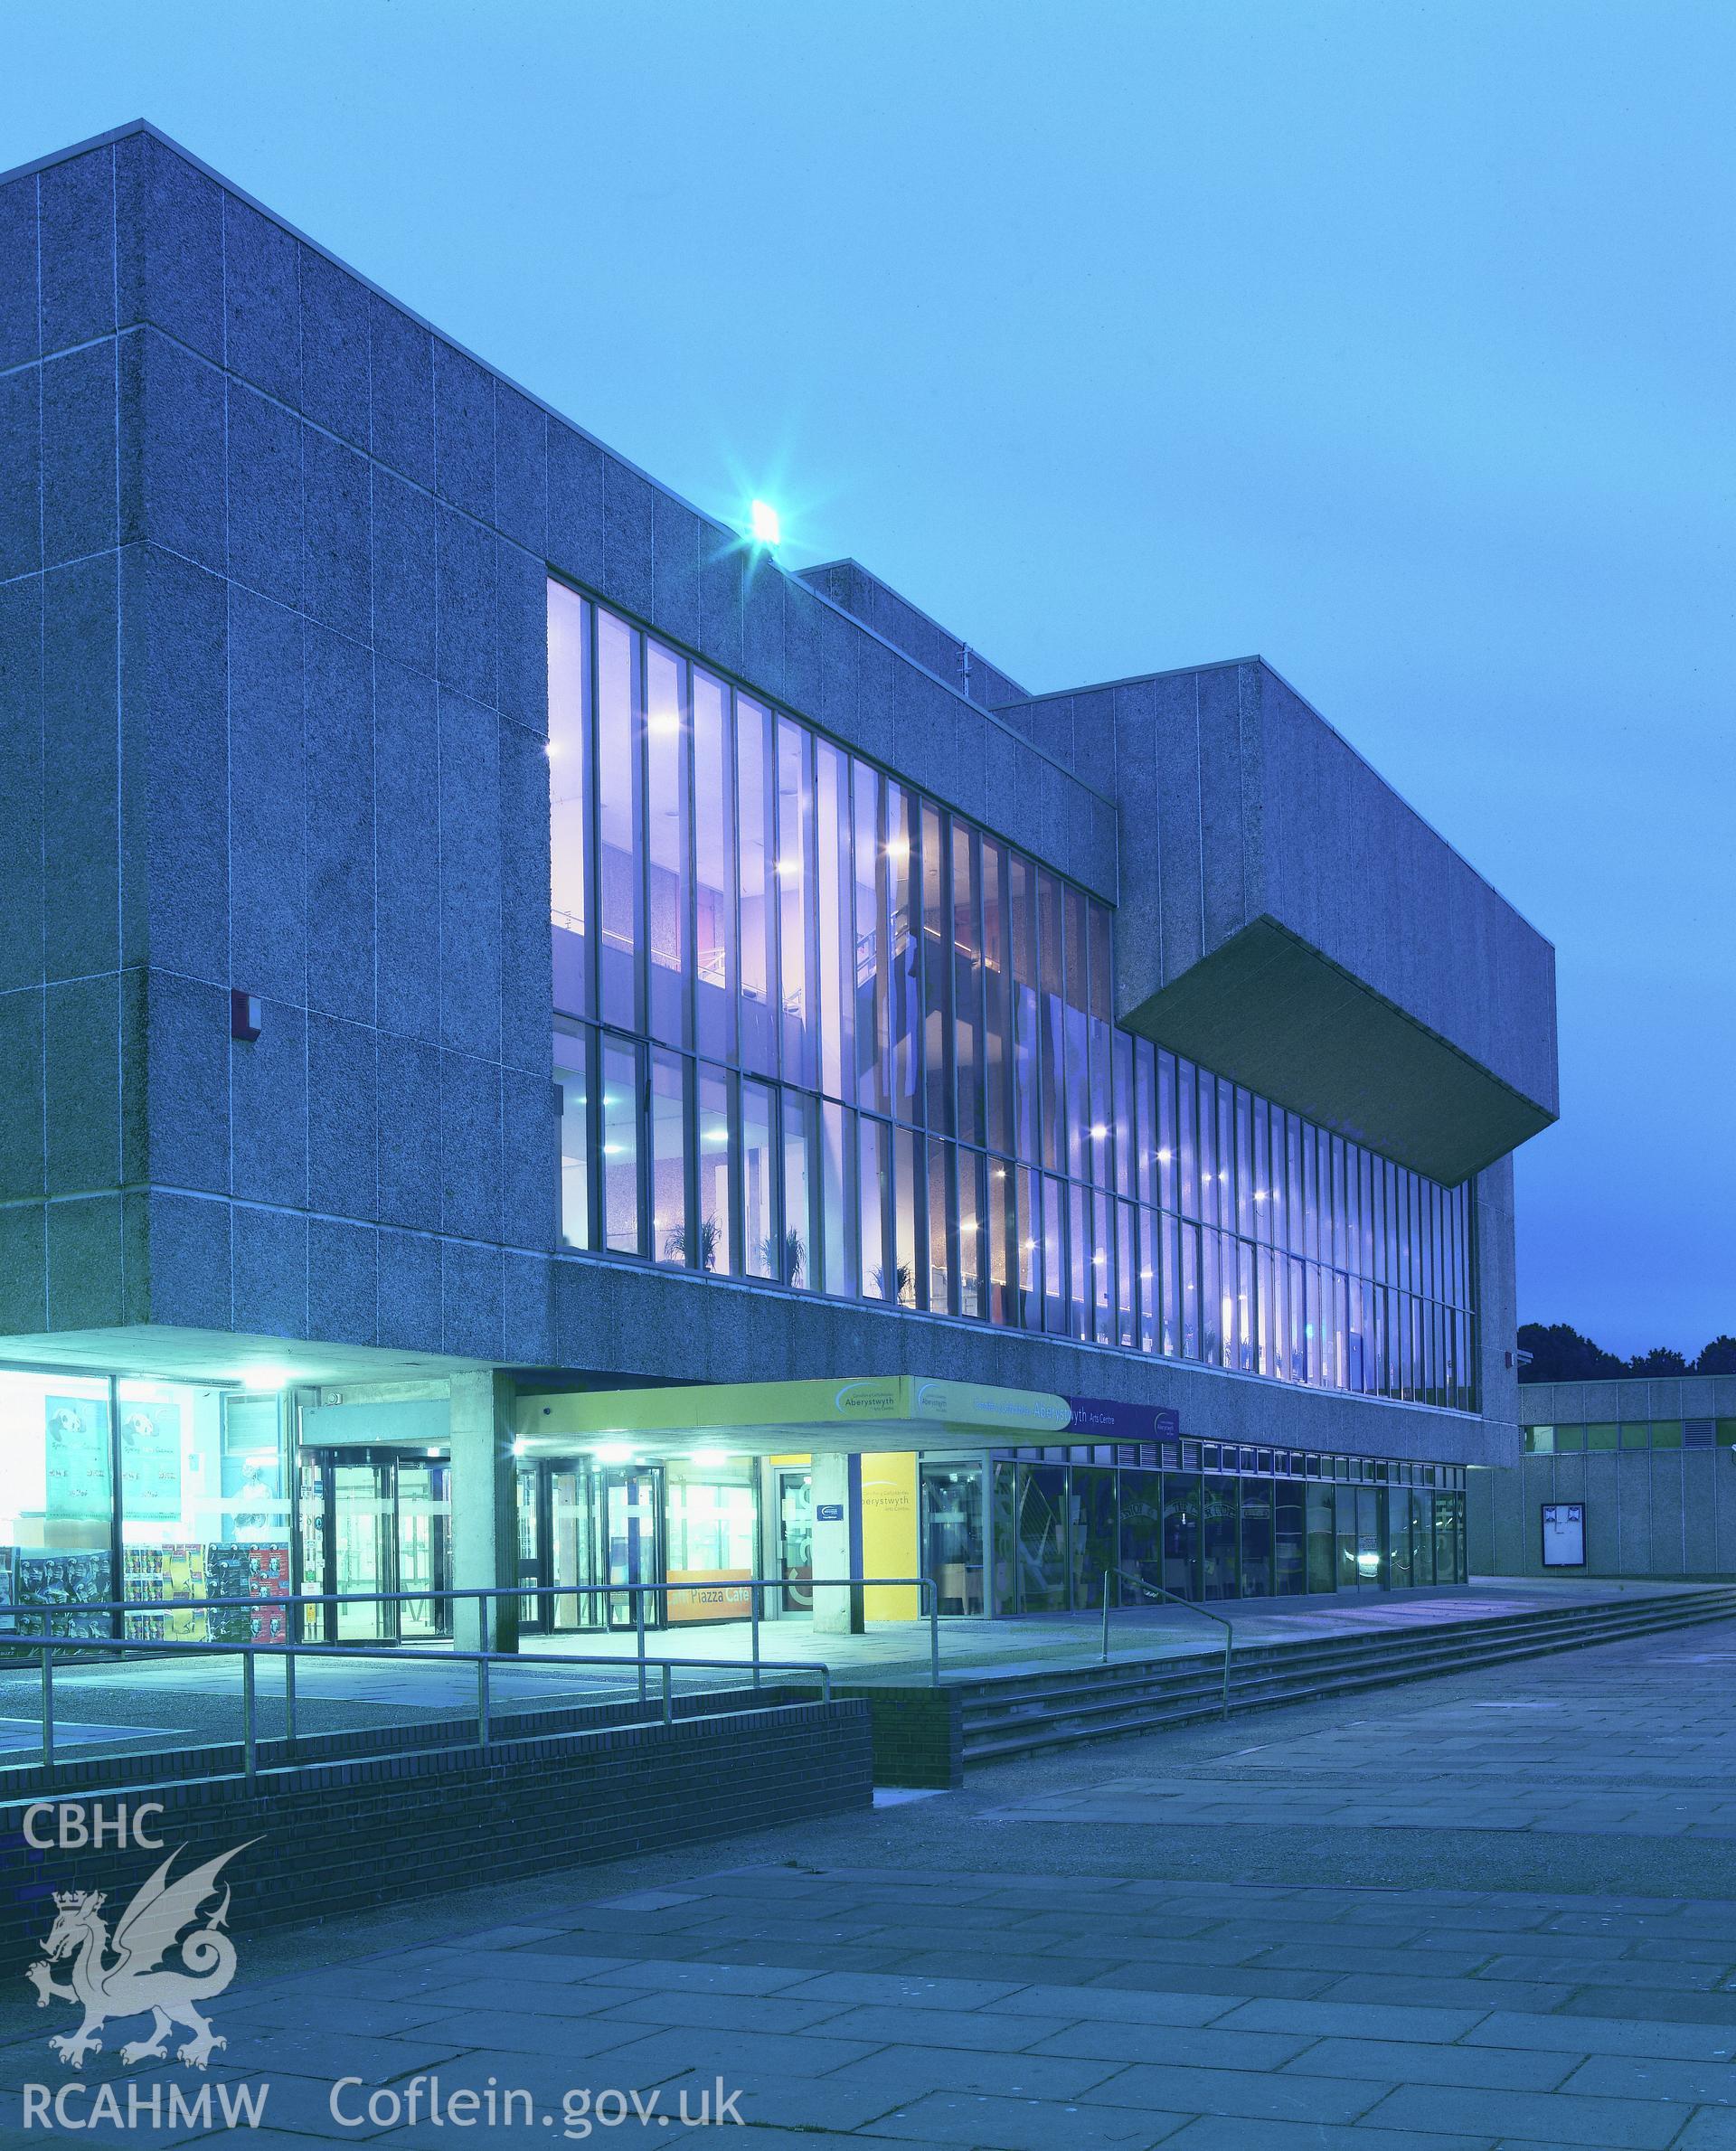 RCAHMW colour transparency showing view of Aberystwyth Arts Centre in the evening.